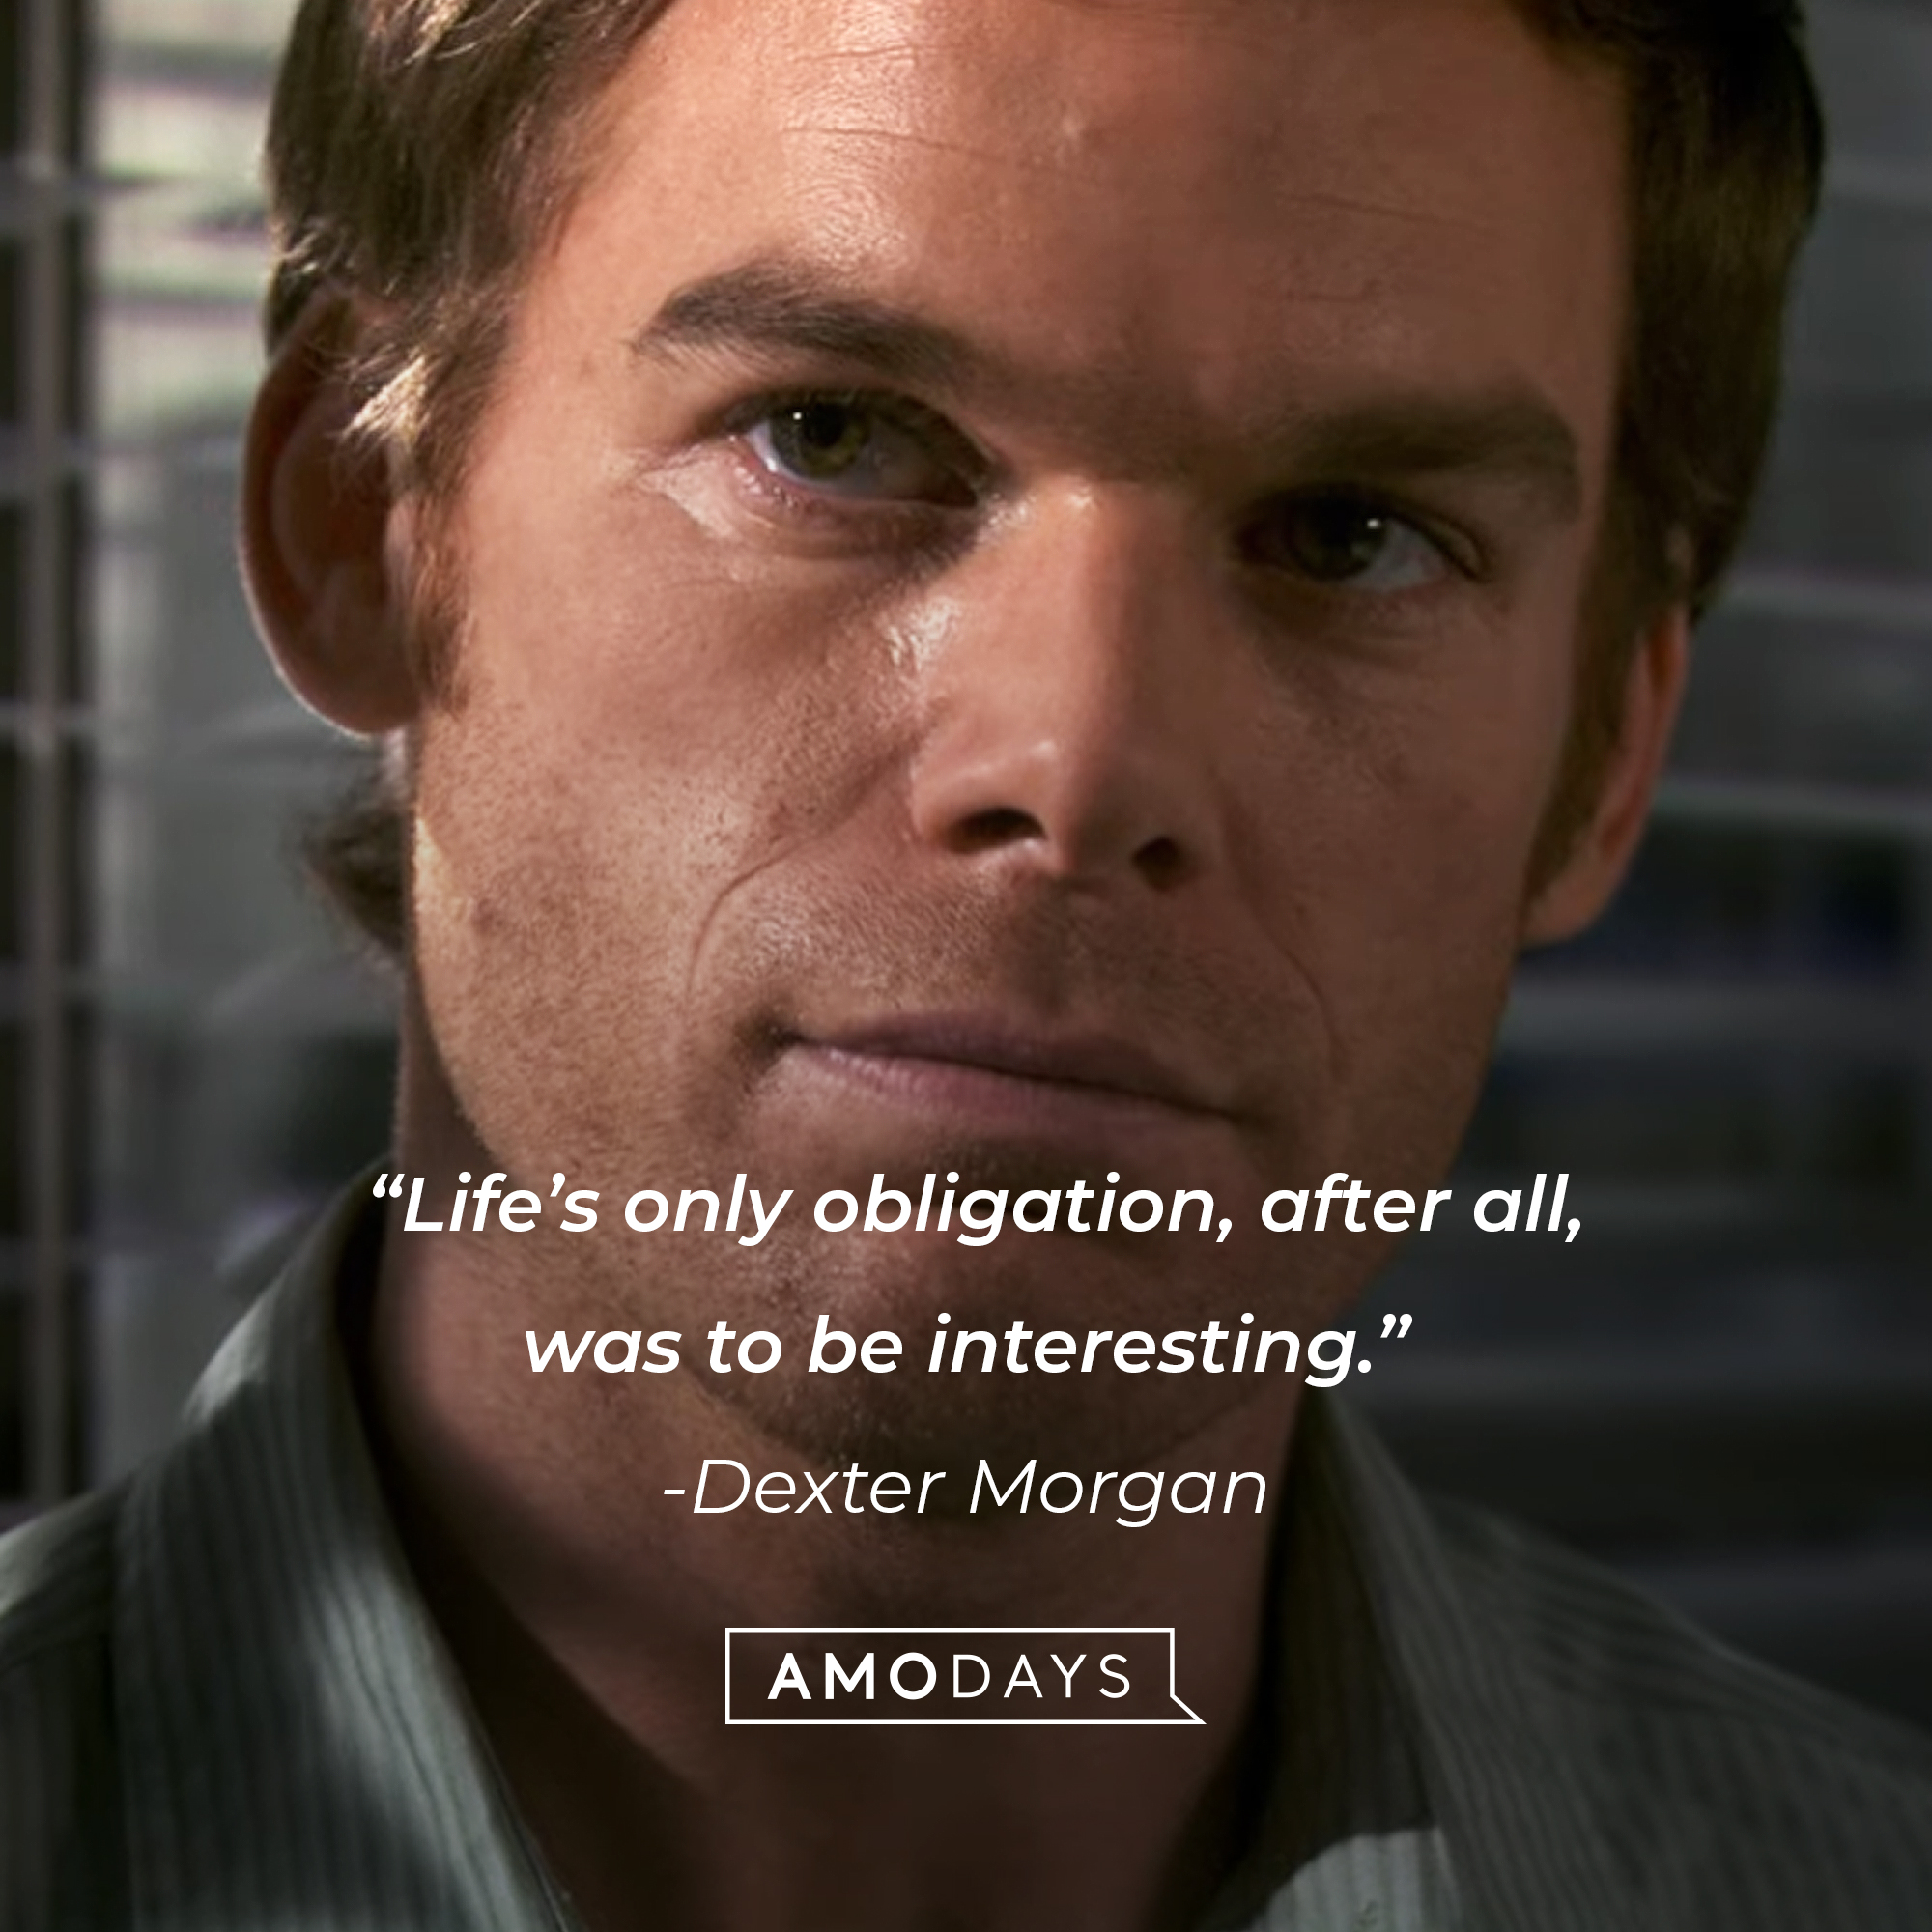 Dexter Morgan, with his quote: “Life’s only obligation, after all, was to be interesting.” | Source: Showtime